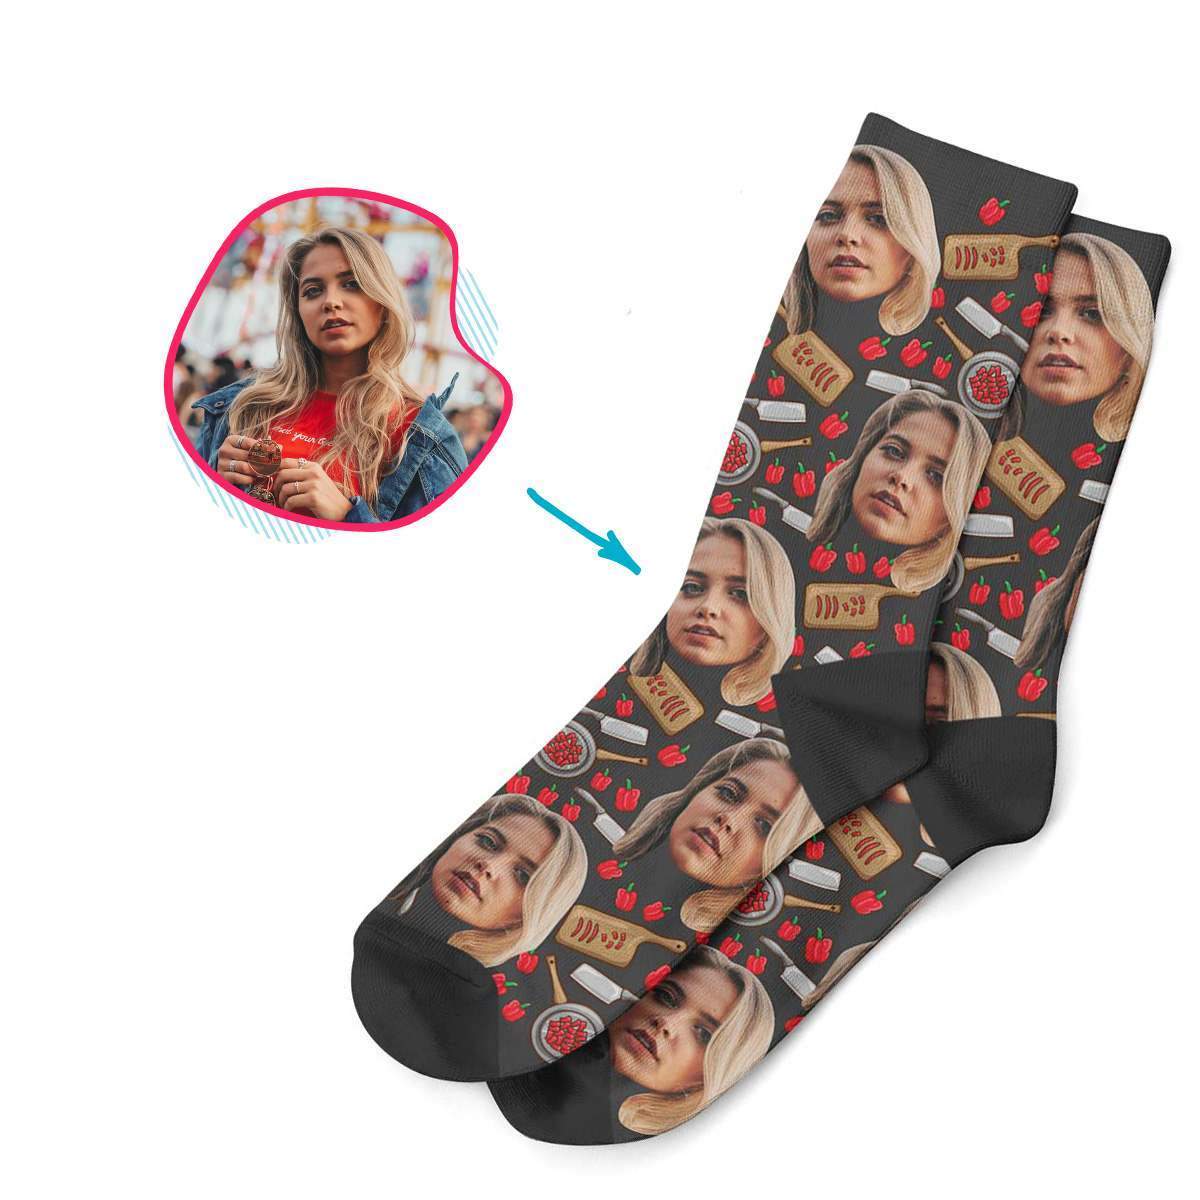 dark Сooking socks personalized with photo of face printed on them